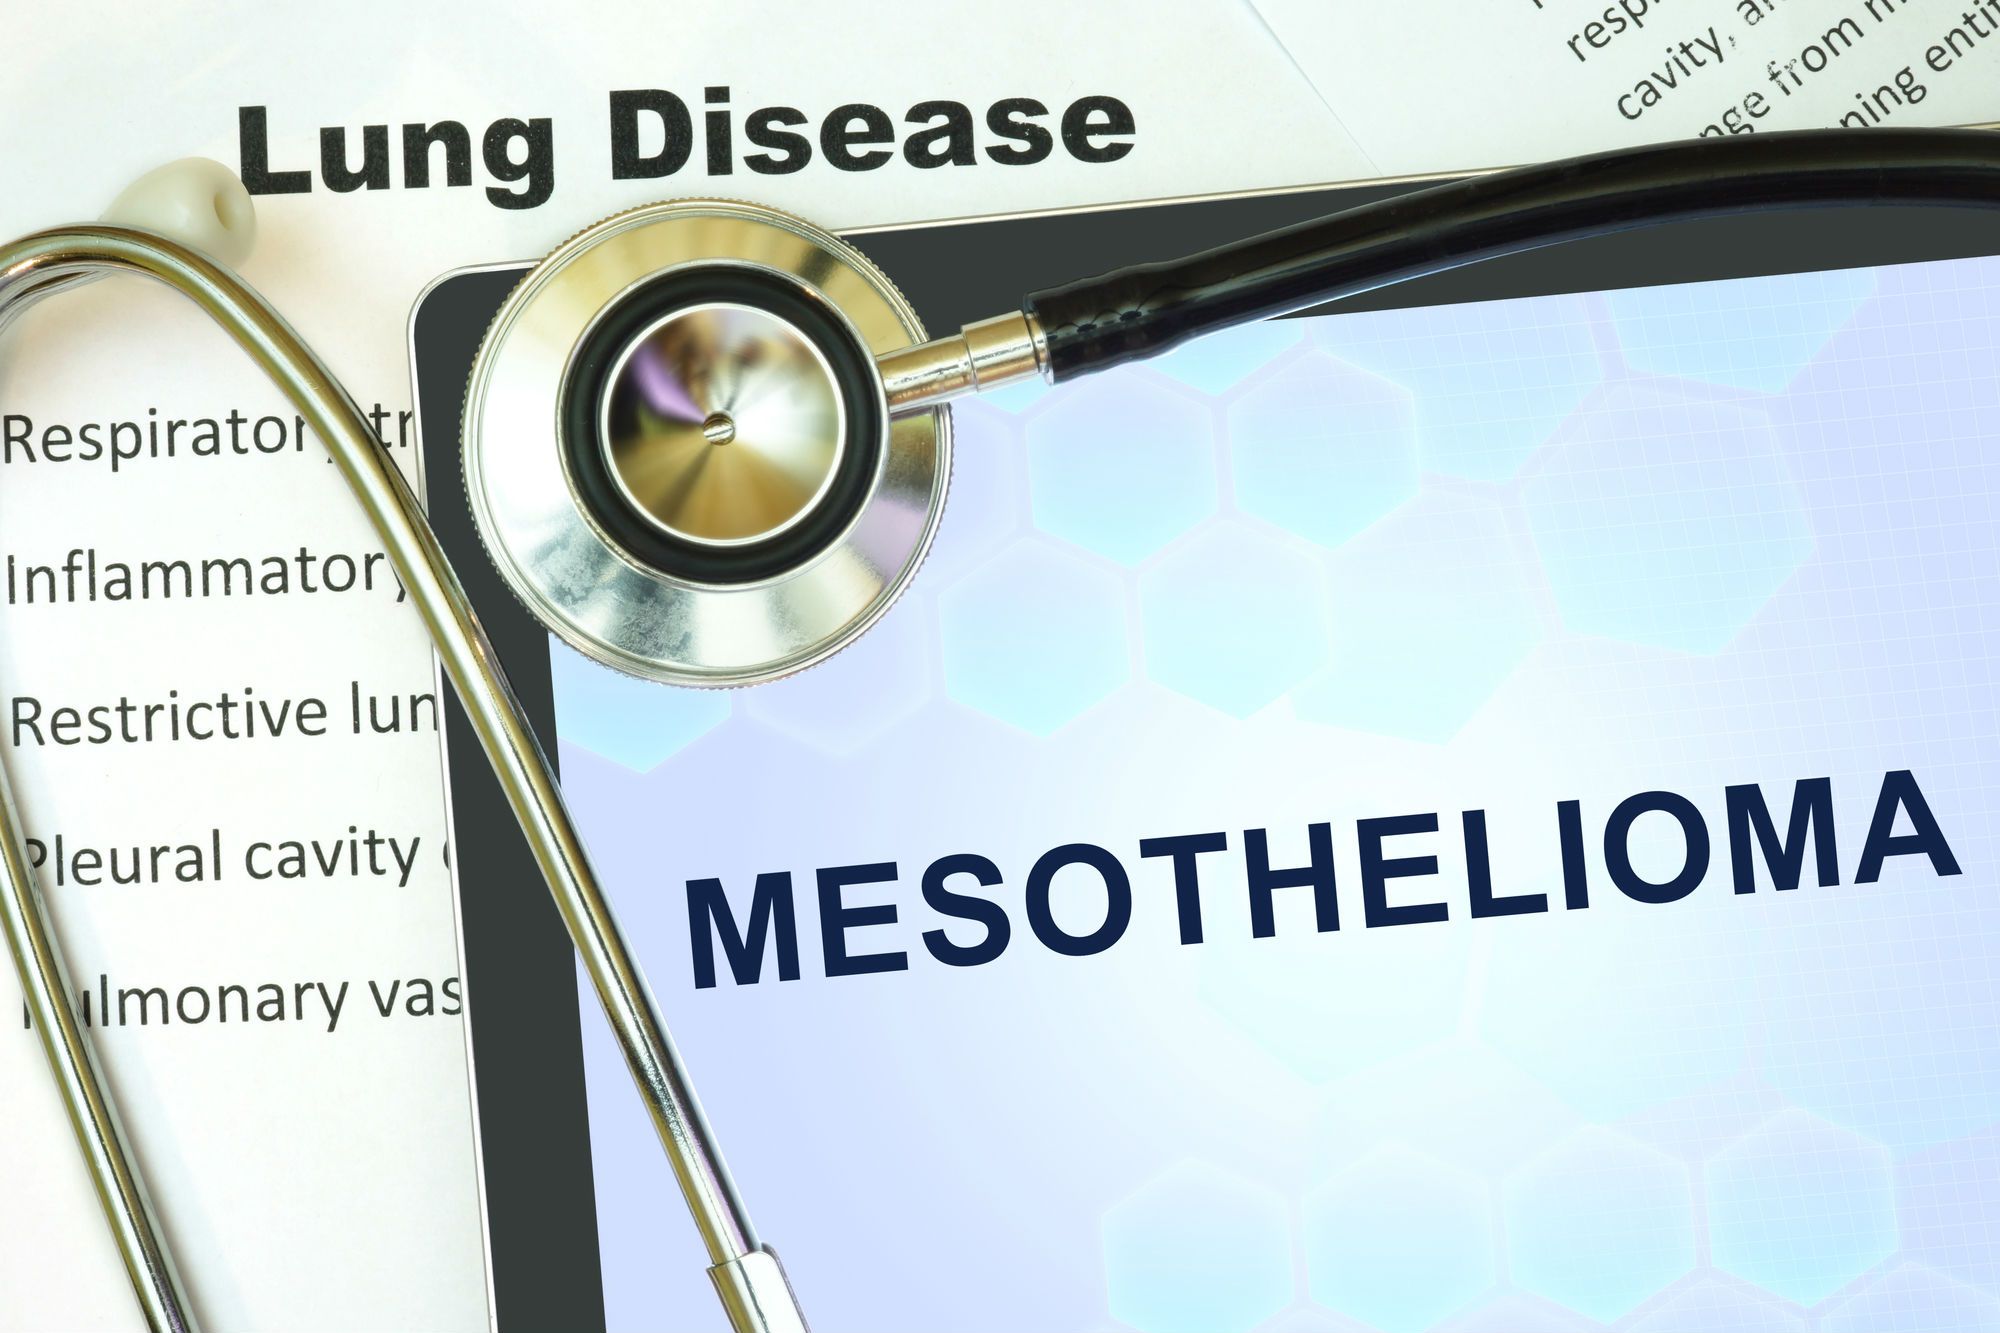 People exposed to asbestos should be aware of the first signs of mesothelioma.